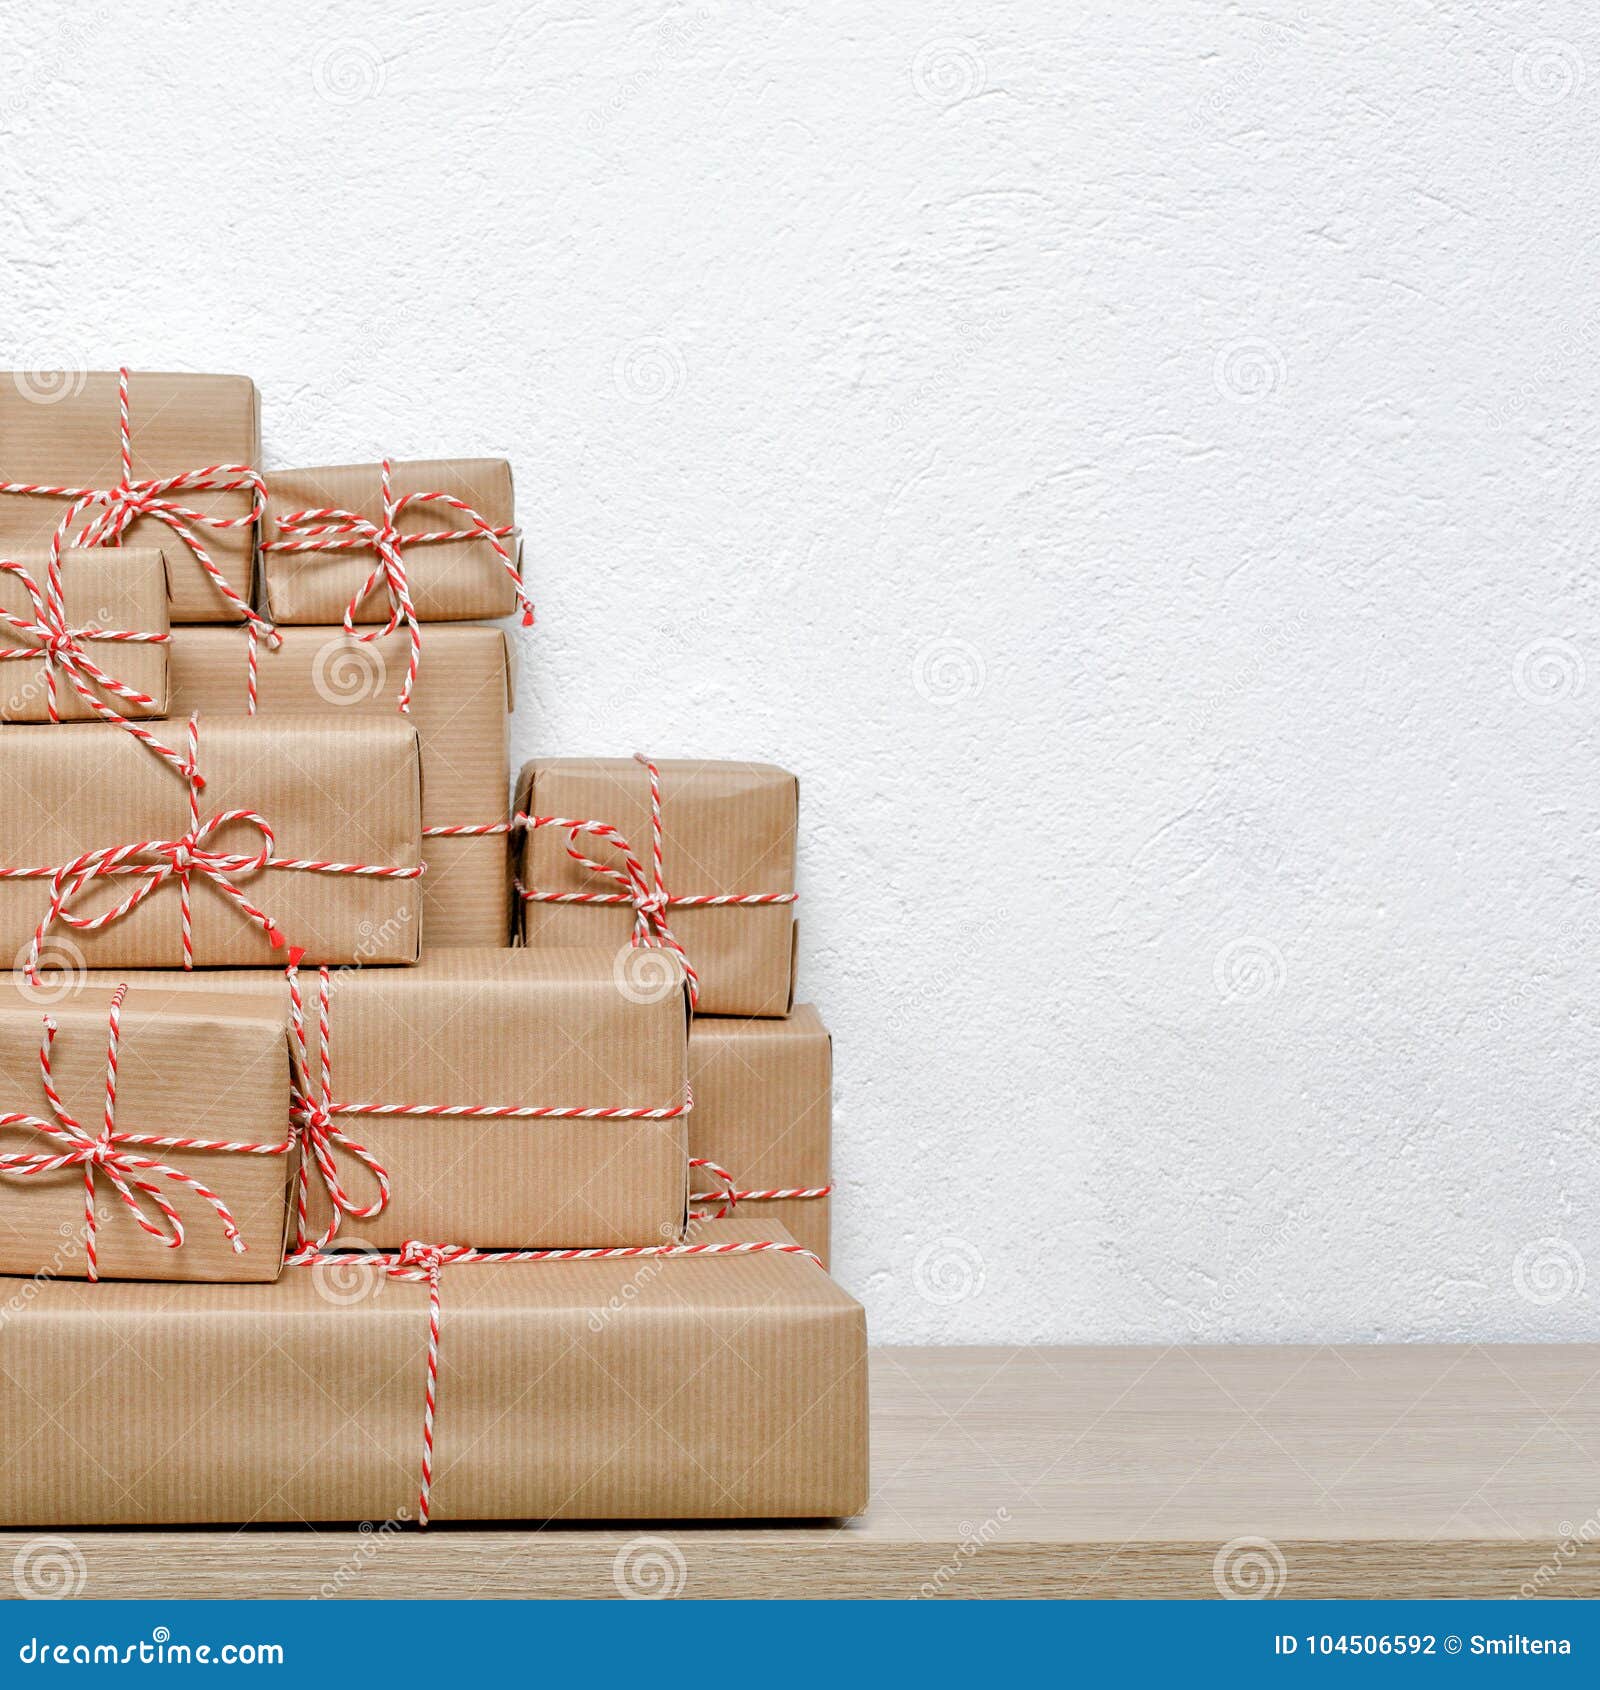 A Pile of Christmas Gifts Wrapped in Rustic Paper Stock Photo - Image ...